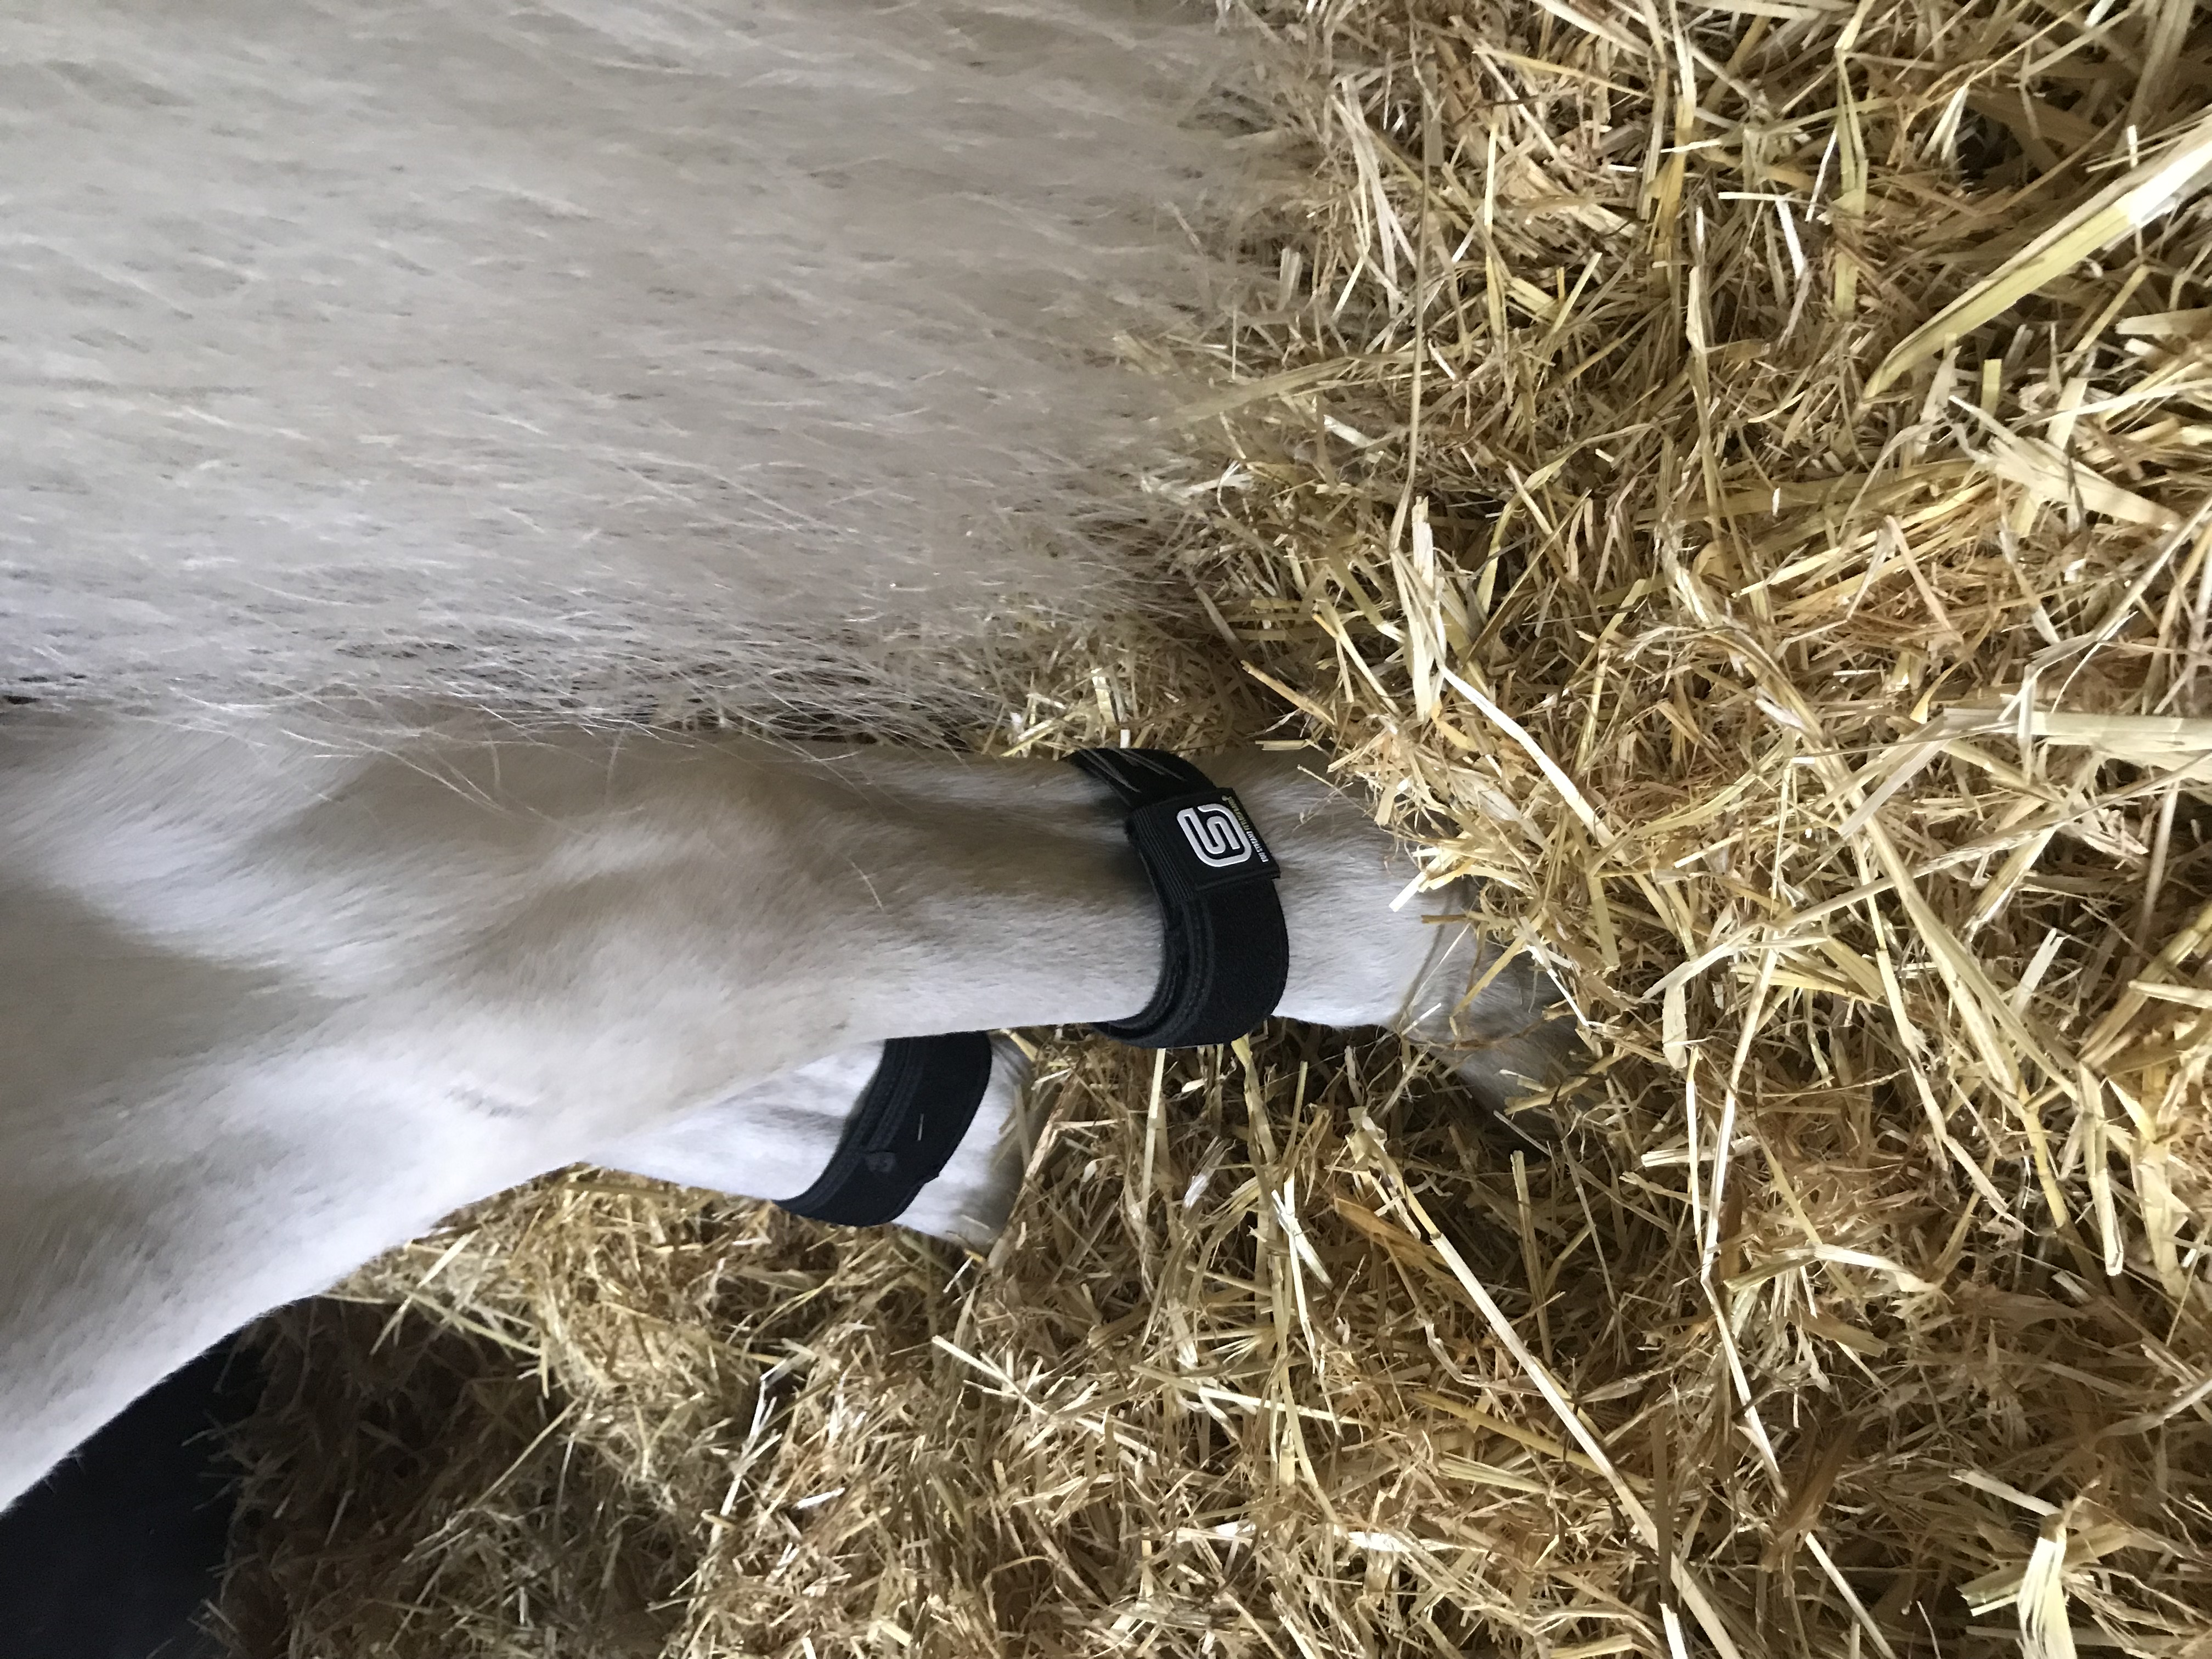 The bands can be worn above or below the fetlock joint for 8-24 hours